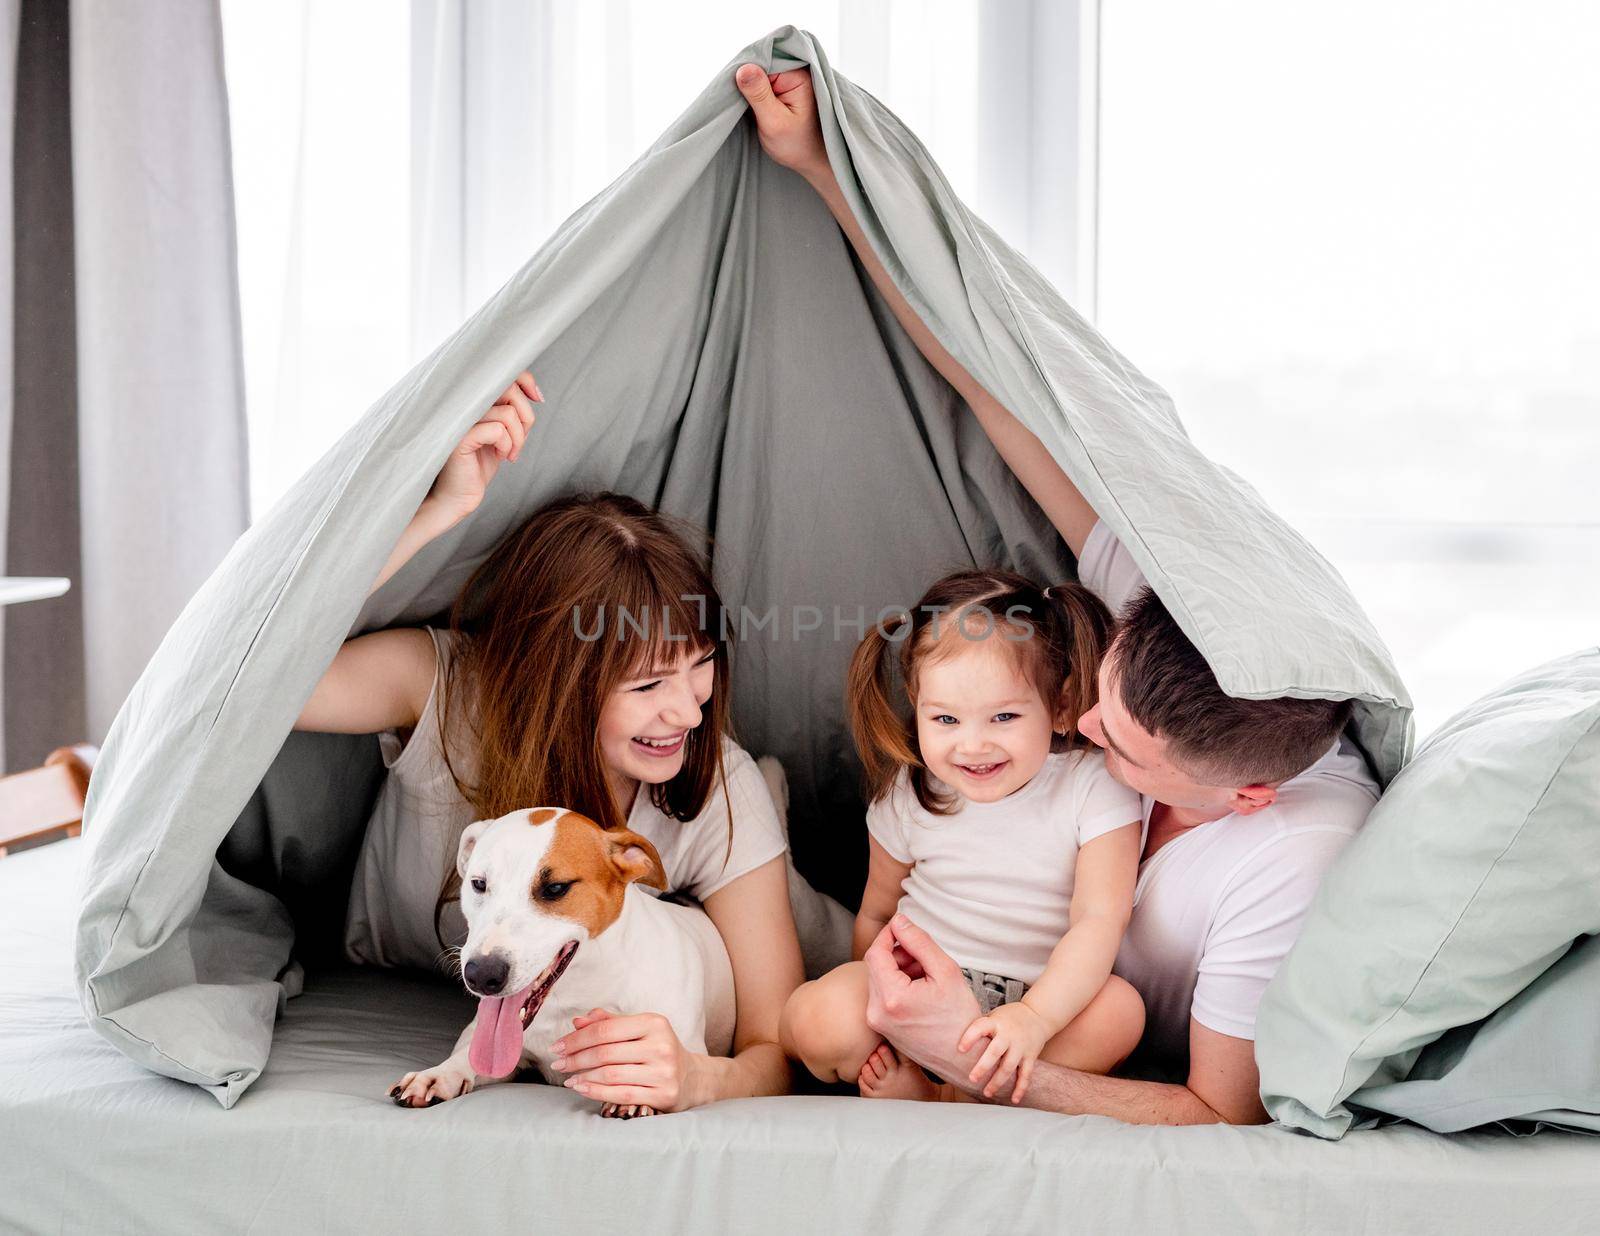 Family under the blanket in the bed by tan4ikk1